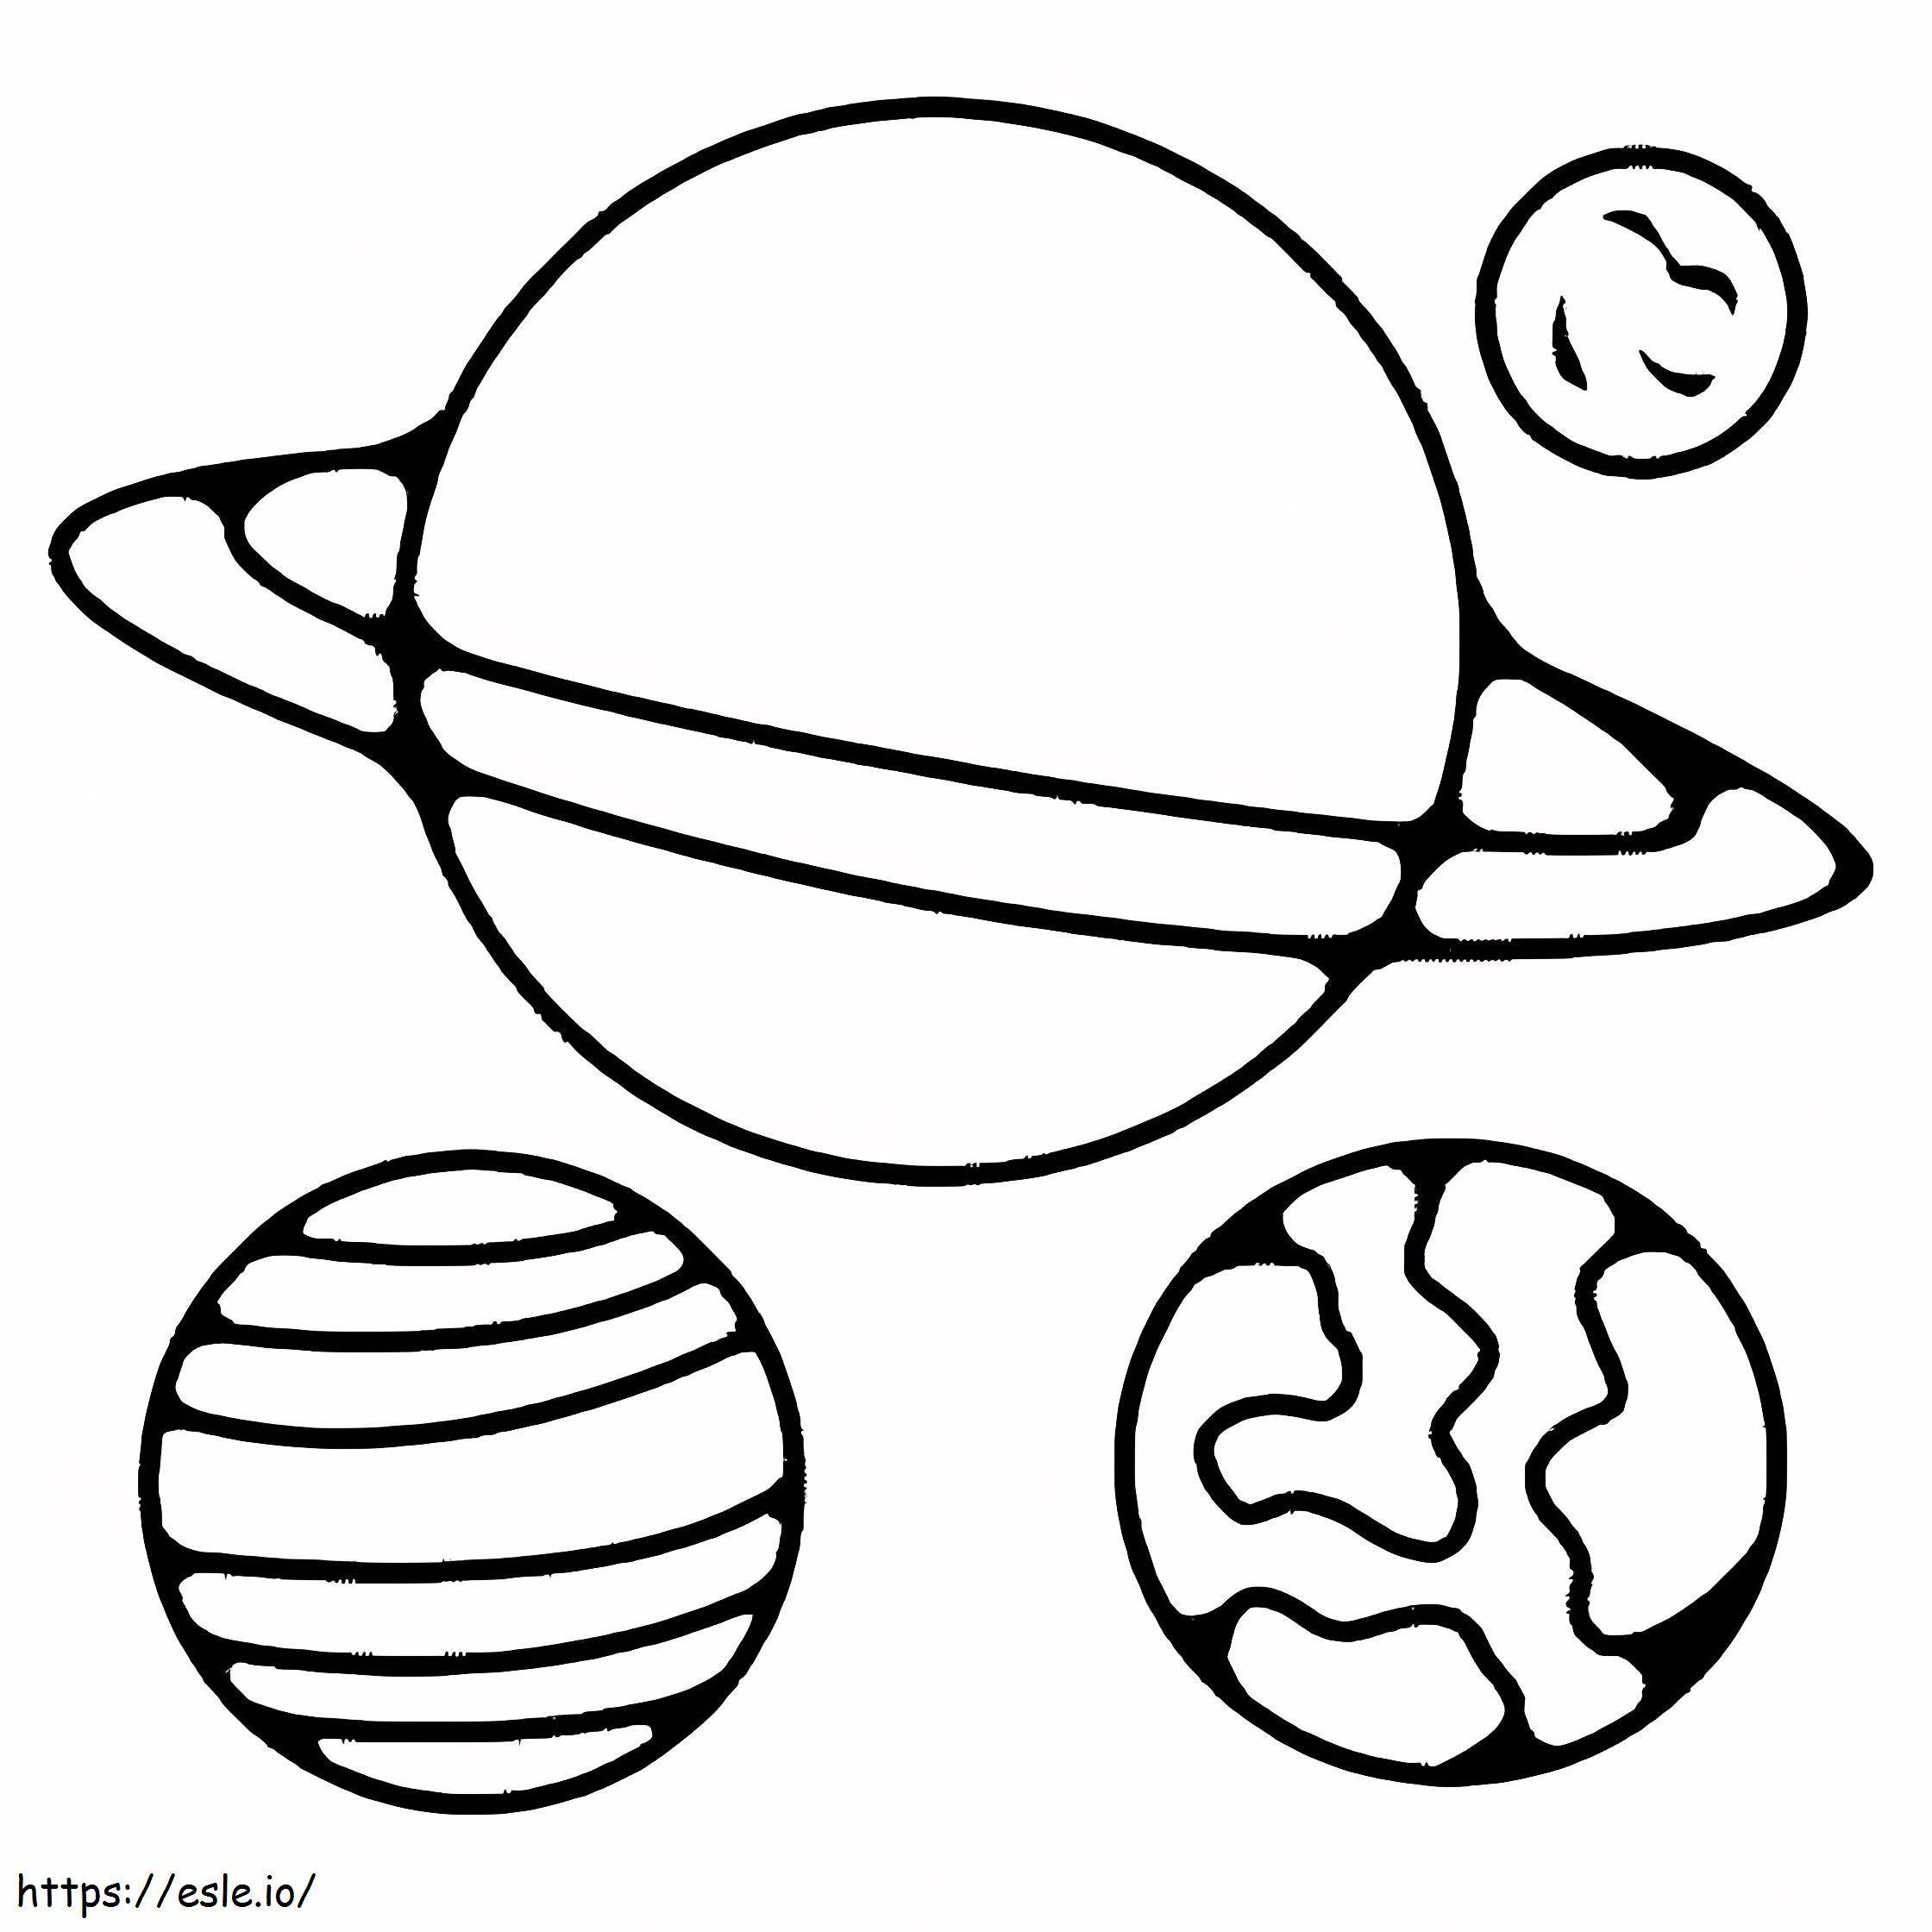 Drawing Of Planets coloring page